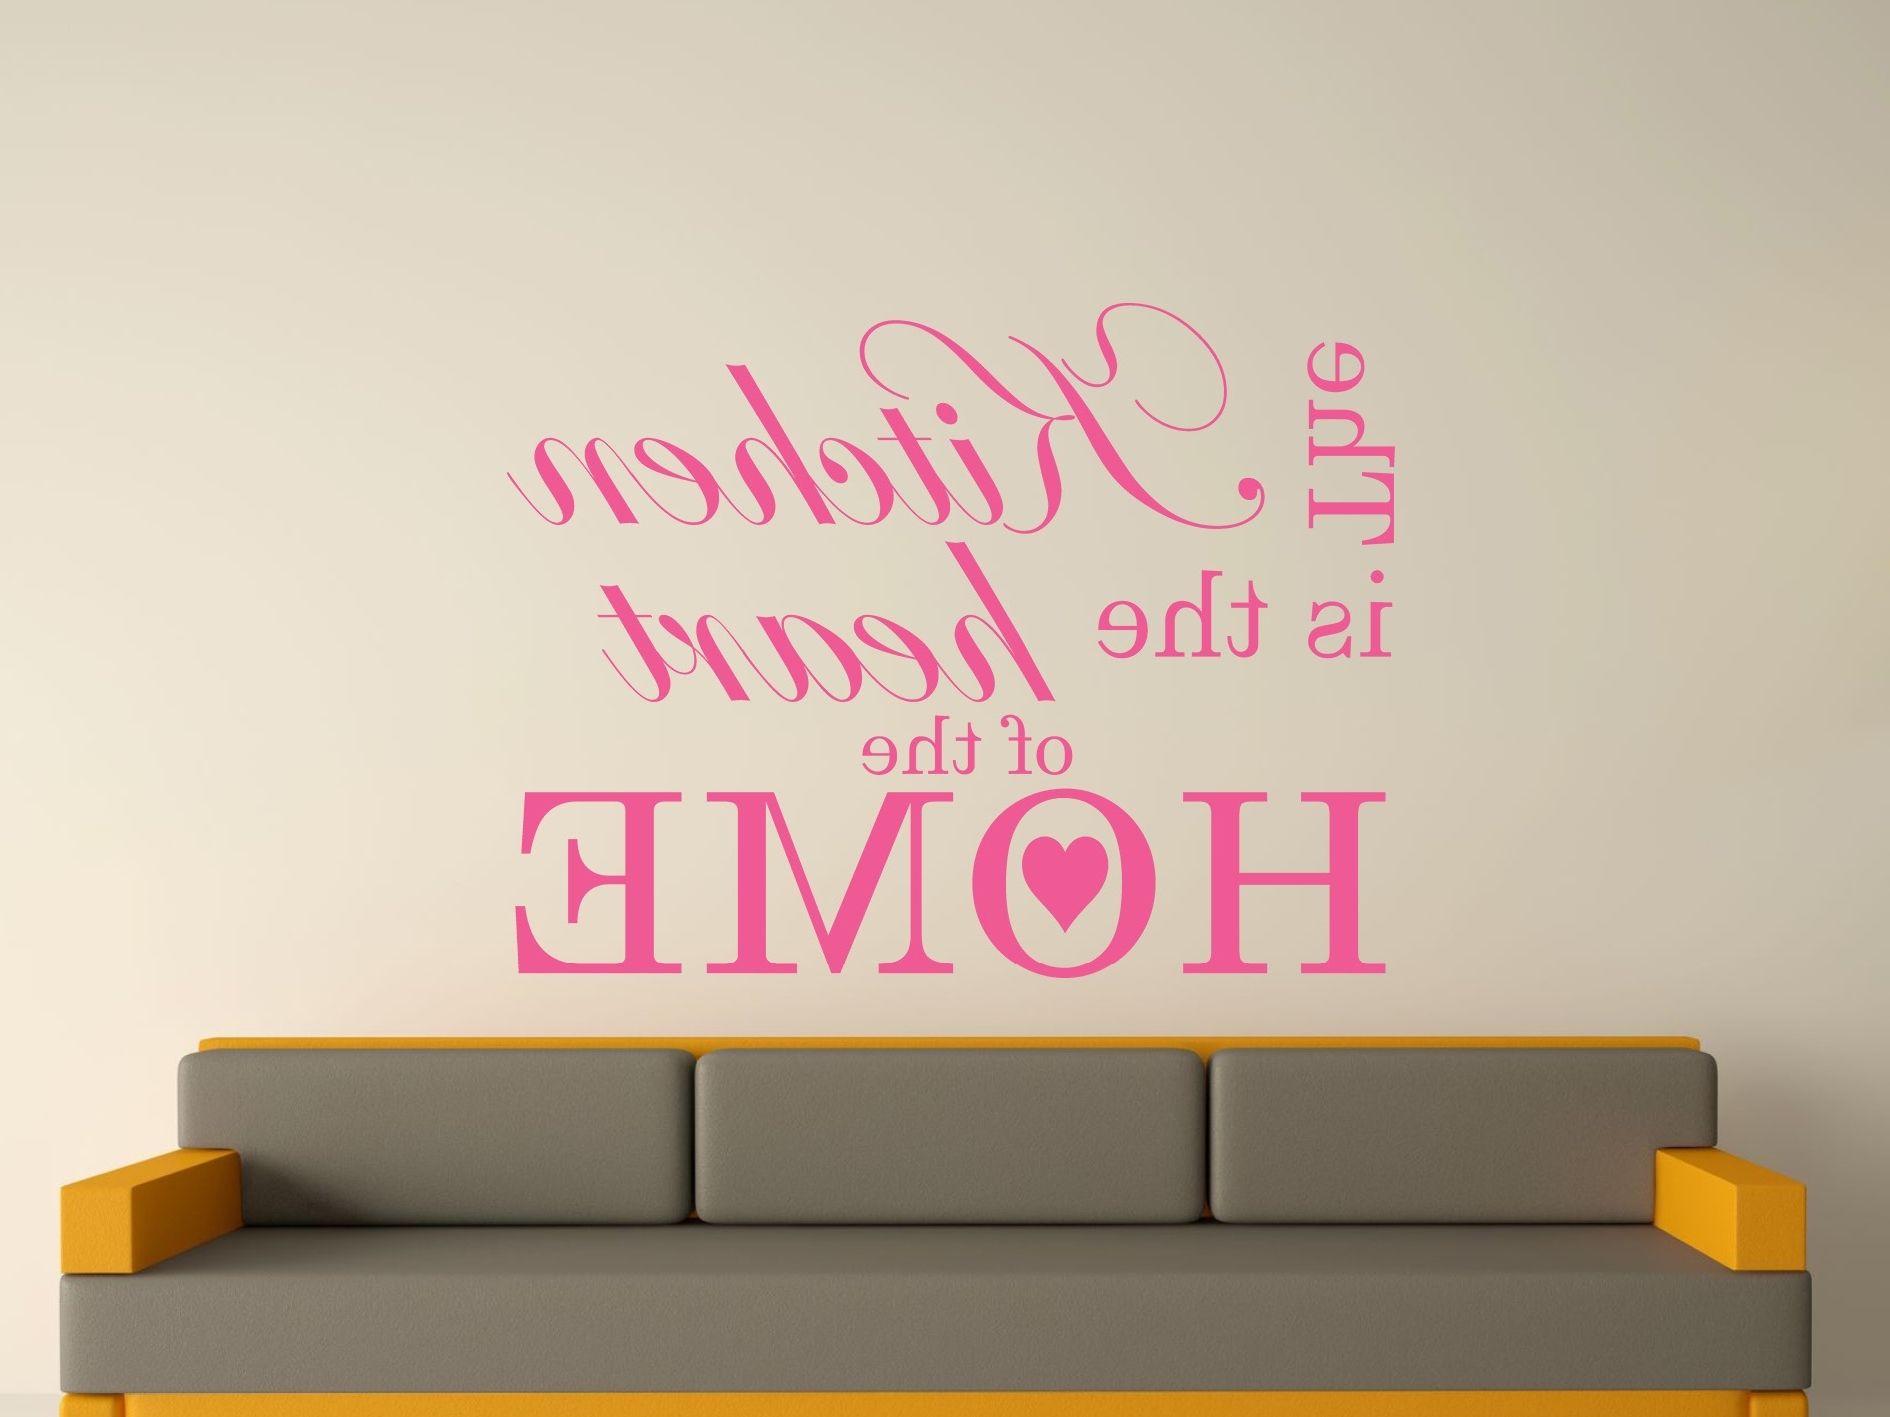 Widely Used The Kitchen Is The Heart Of The Home Wall Art Sticker Text 3 Sizes With Wall Sticker Art (View 12 of 15)